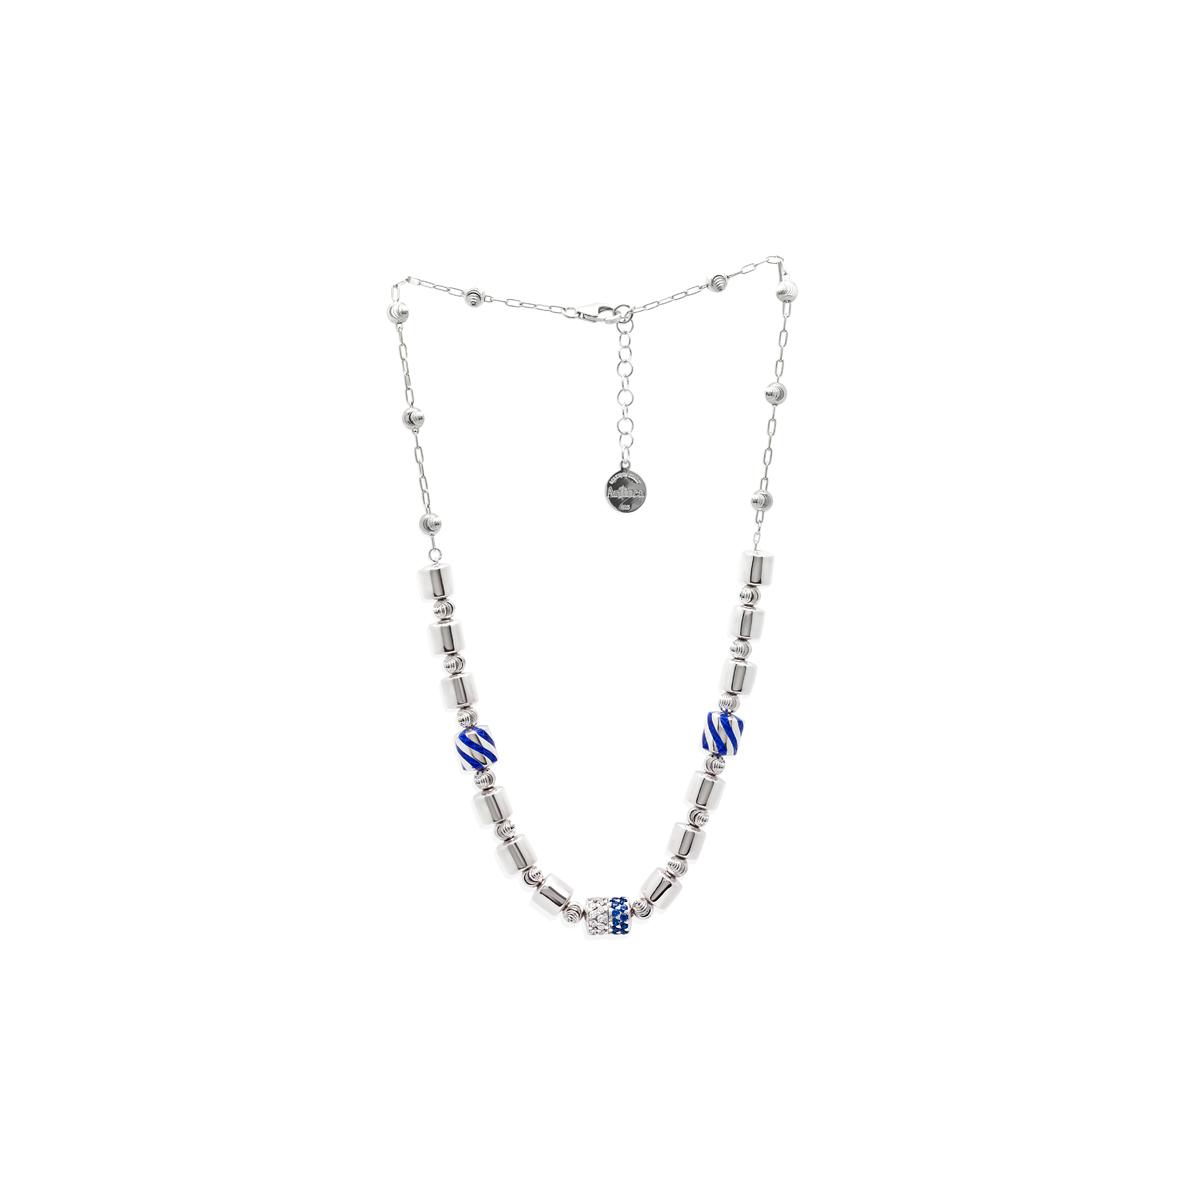 Choker necklace in 925 rhodium-plated and enamelled silver, with central cubic zirconia pavé - ZCL947-MB